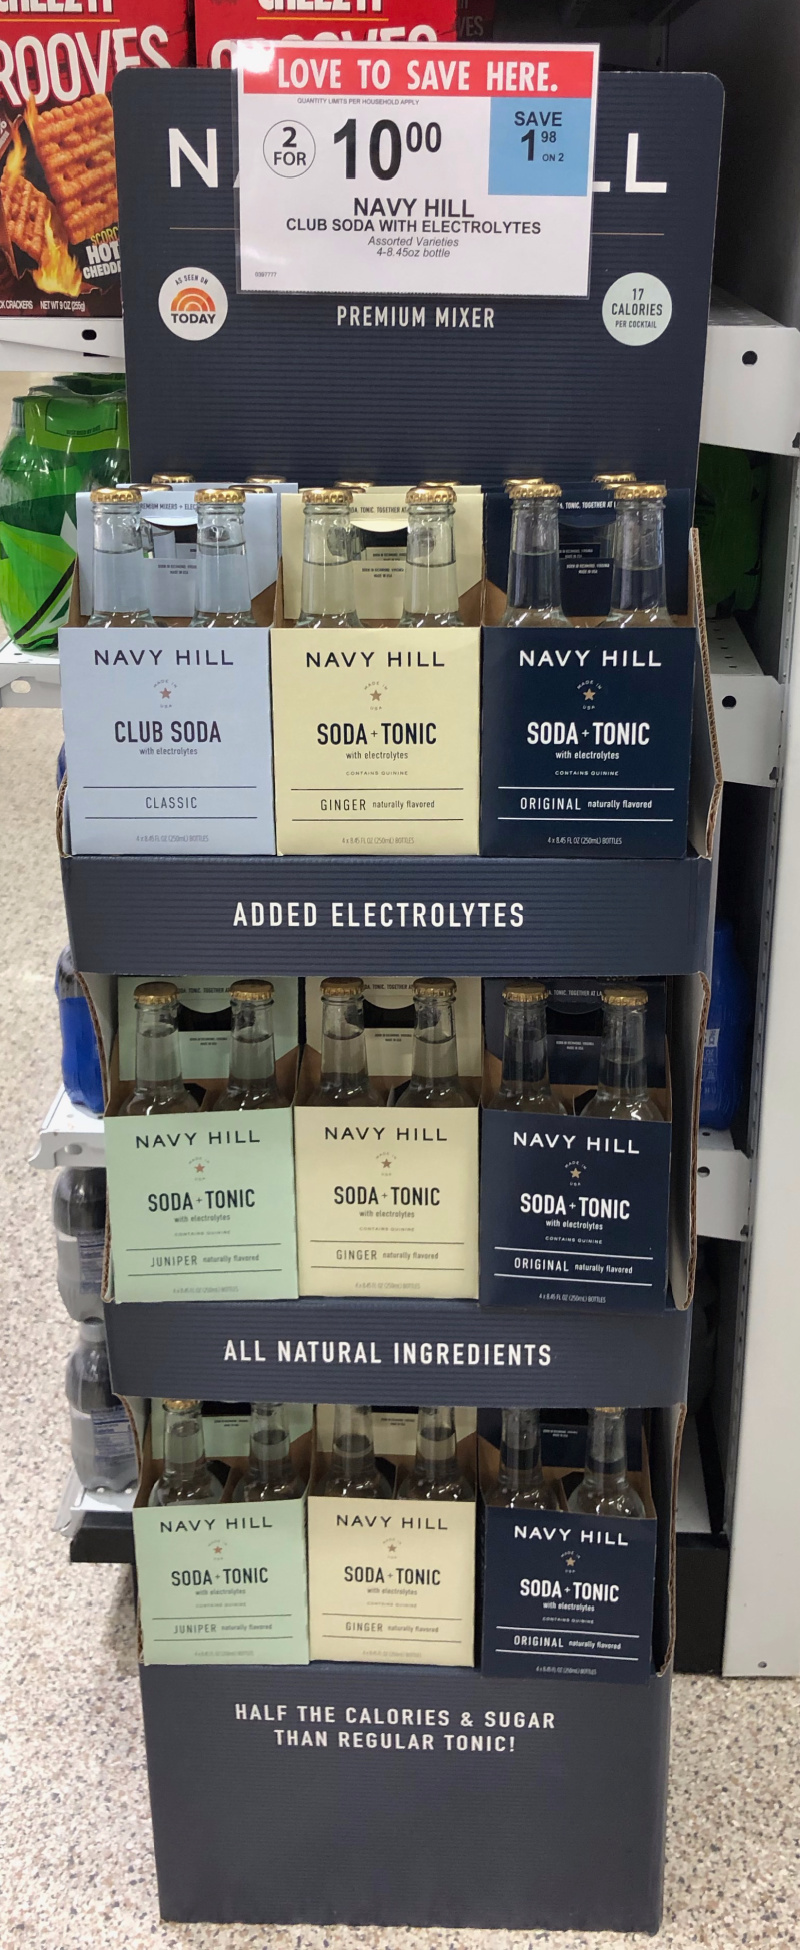 Pick Up Your Favorite Navy Hill Mixers While They Are On Sale At Publix – Save On A Delicious Soda + Tonic Blend! on I Heart Publix 1